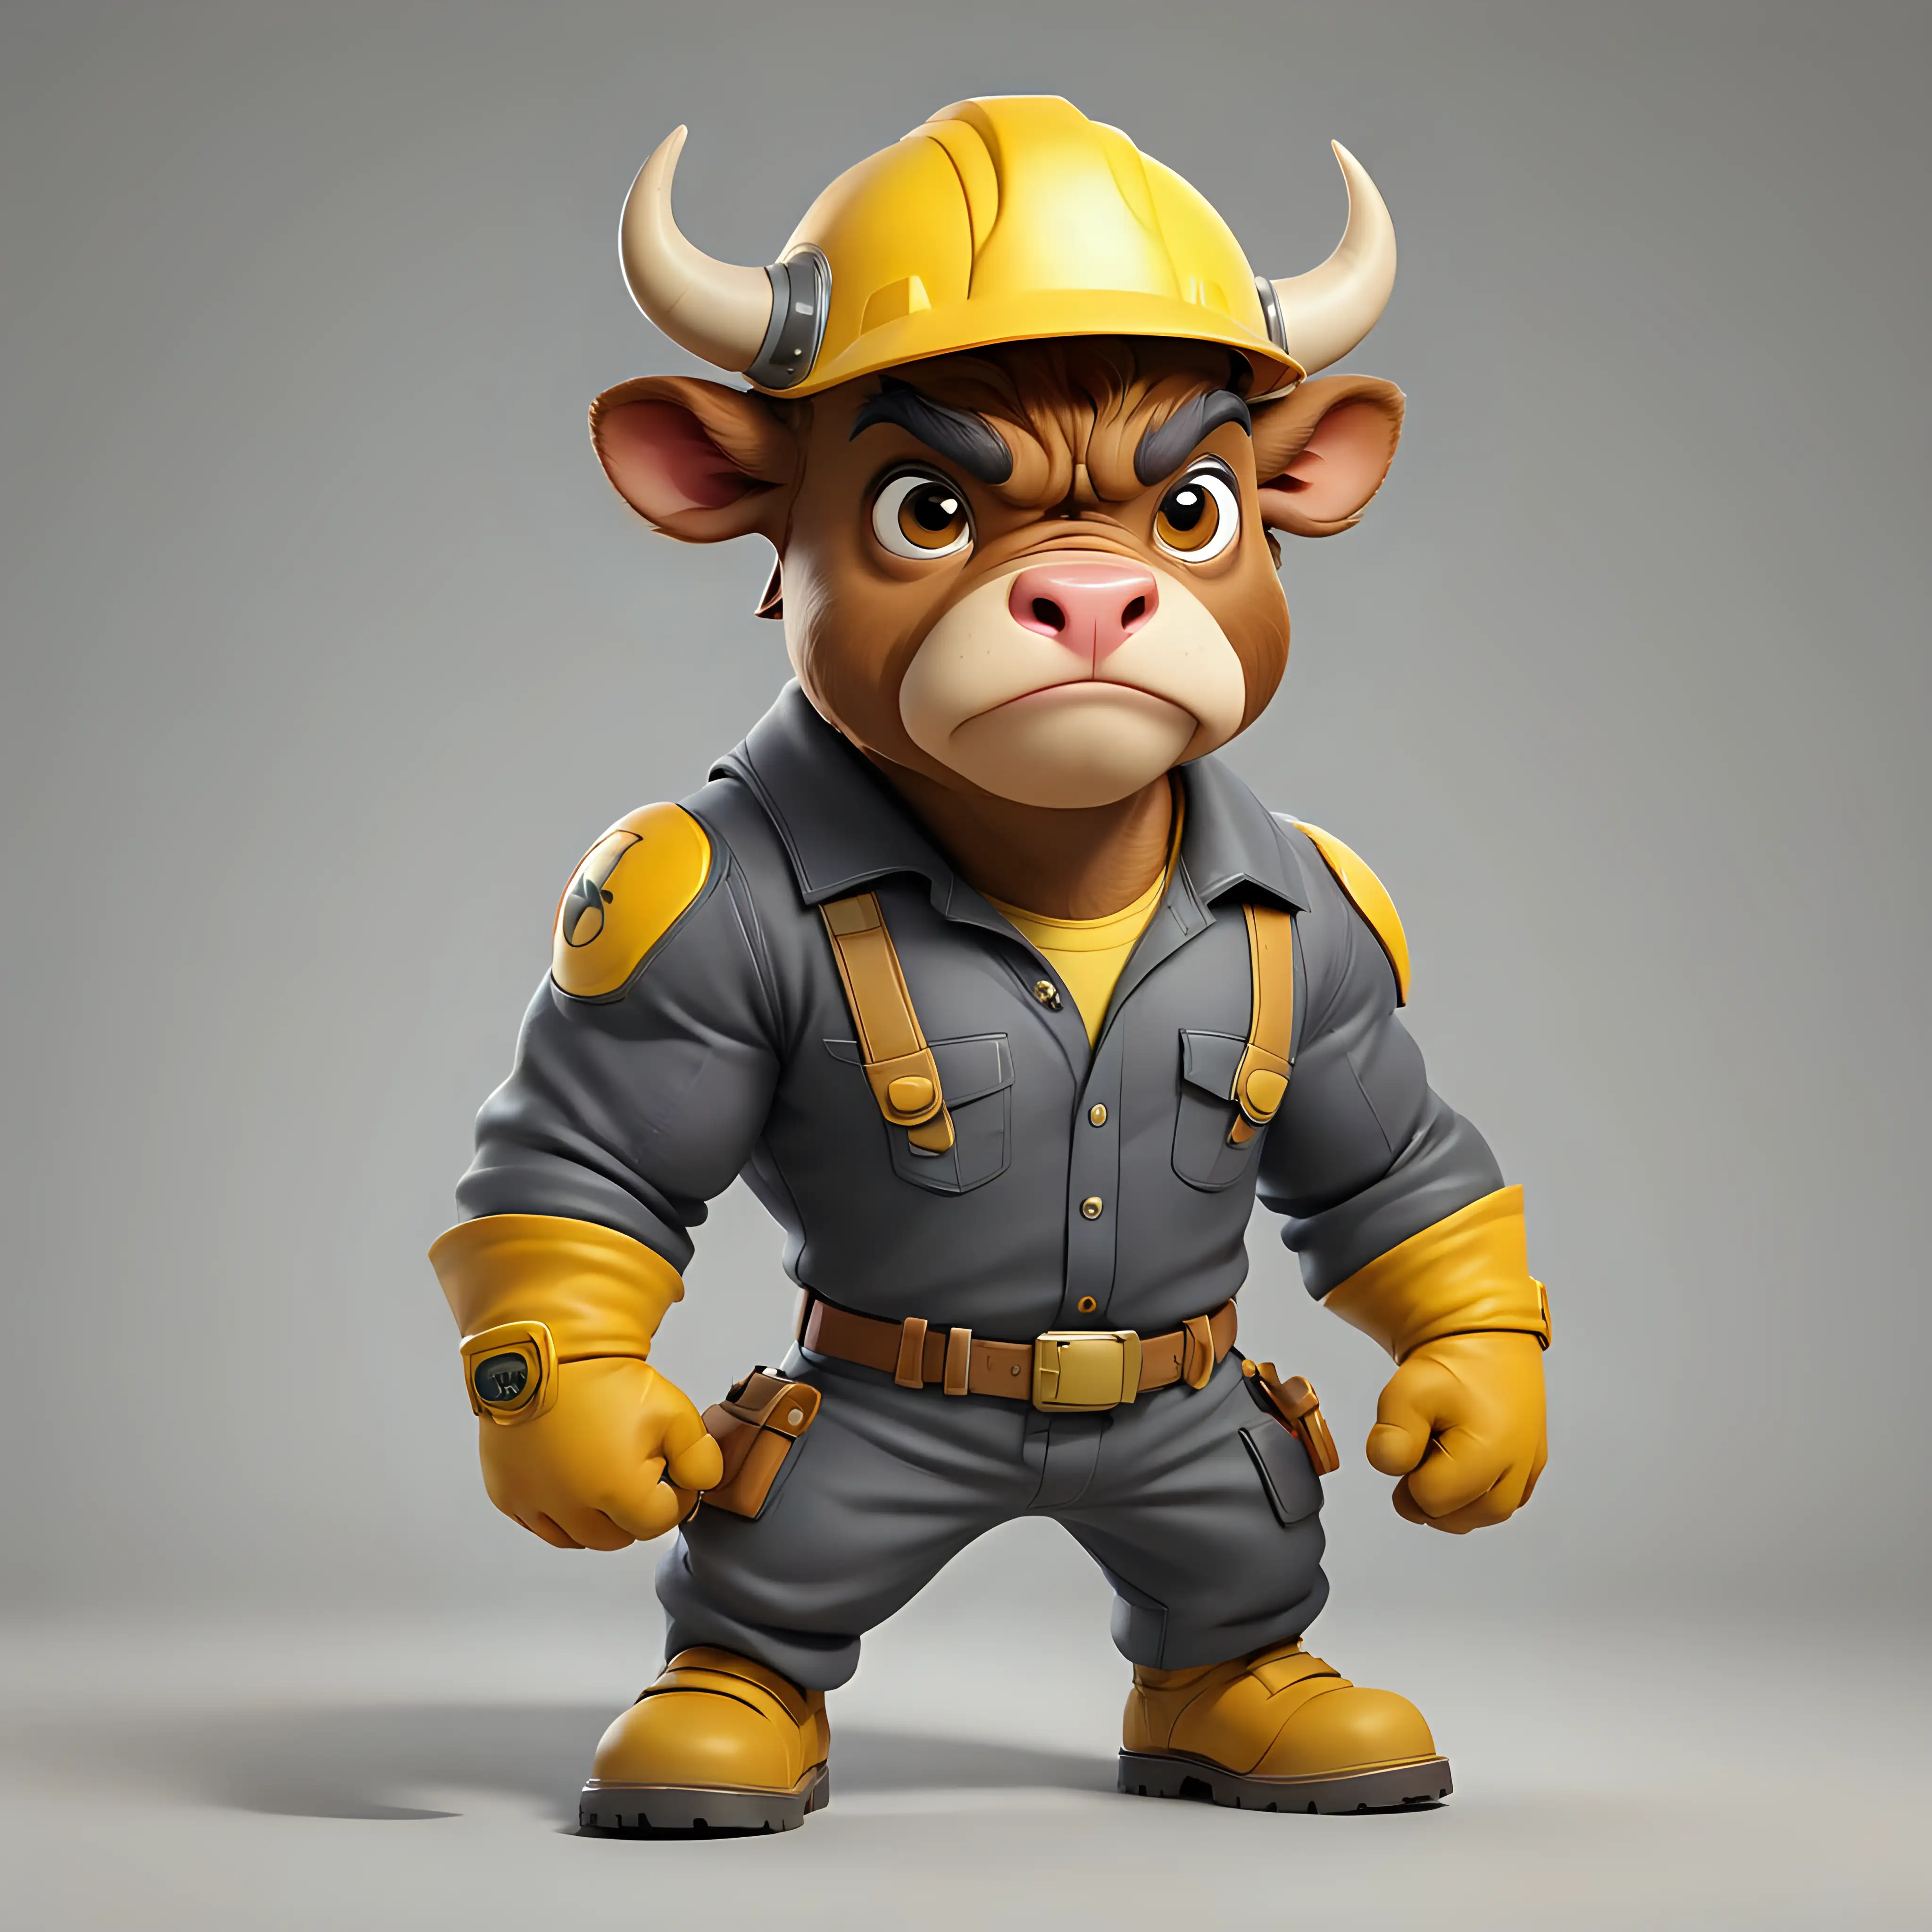 a bull, cartoon style, full body, big eyes, Engineer clothes with yellow helmet, clear background